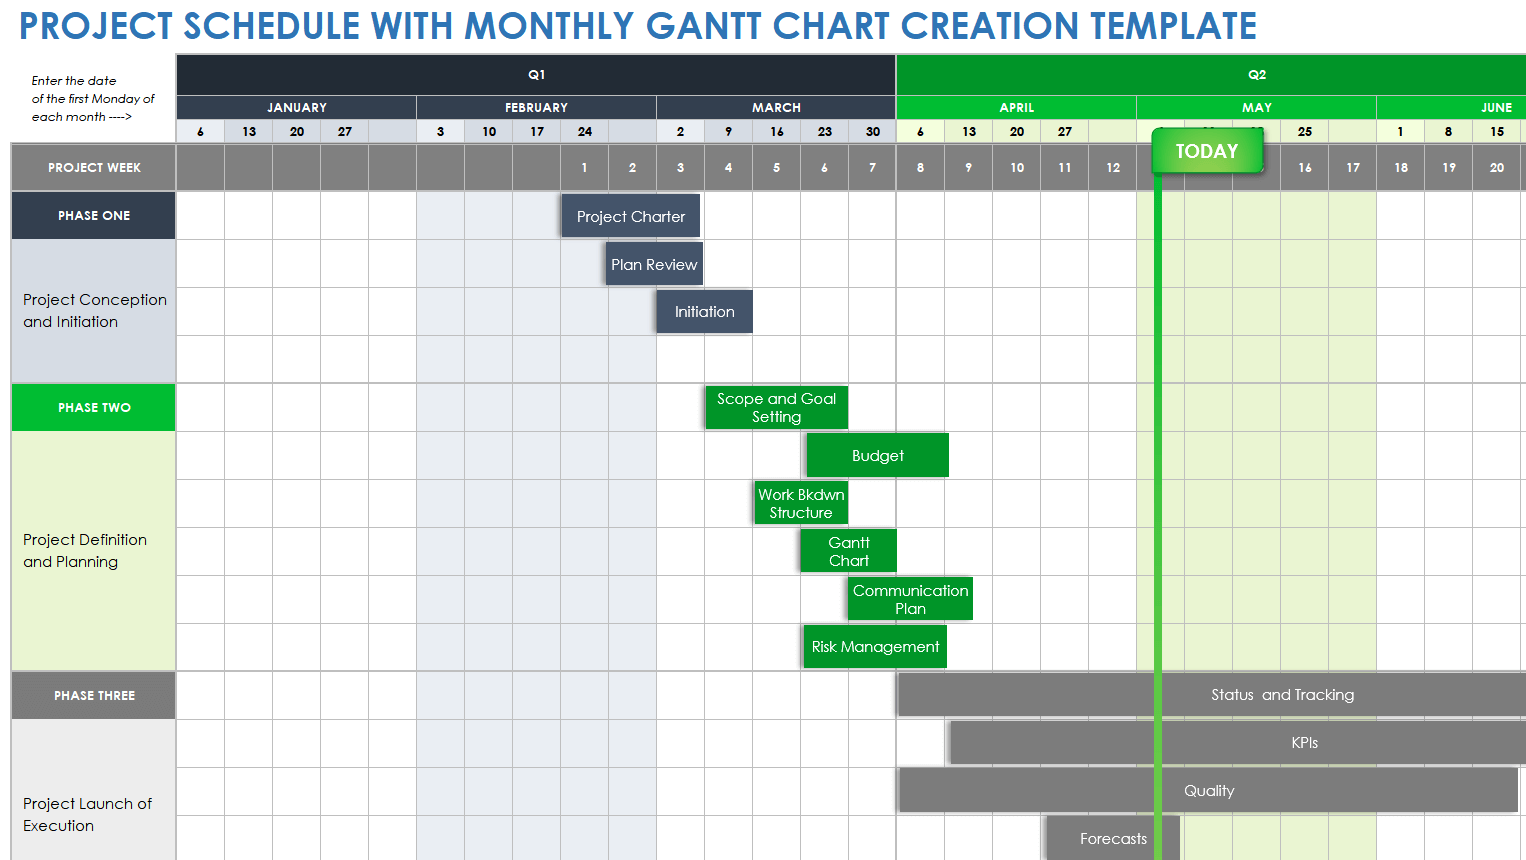 Project Schedule with Monthly Gantt Chart Creation Template